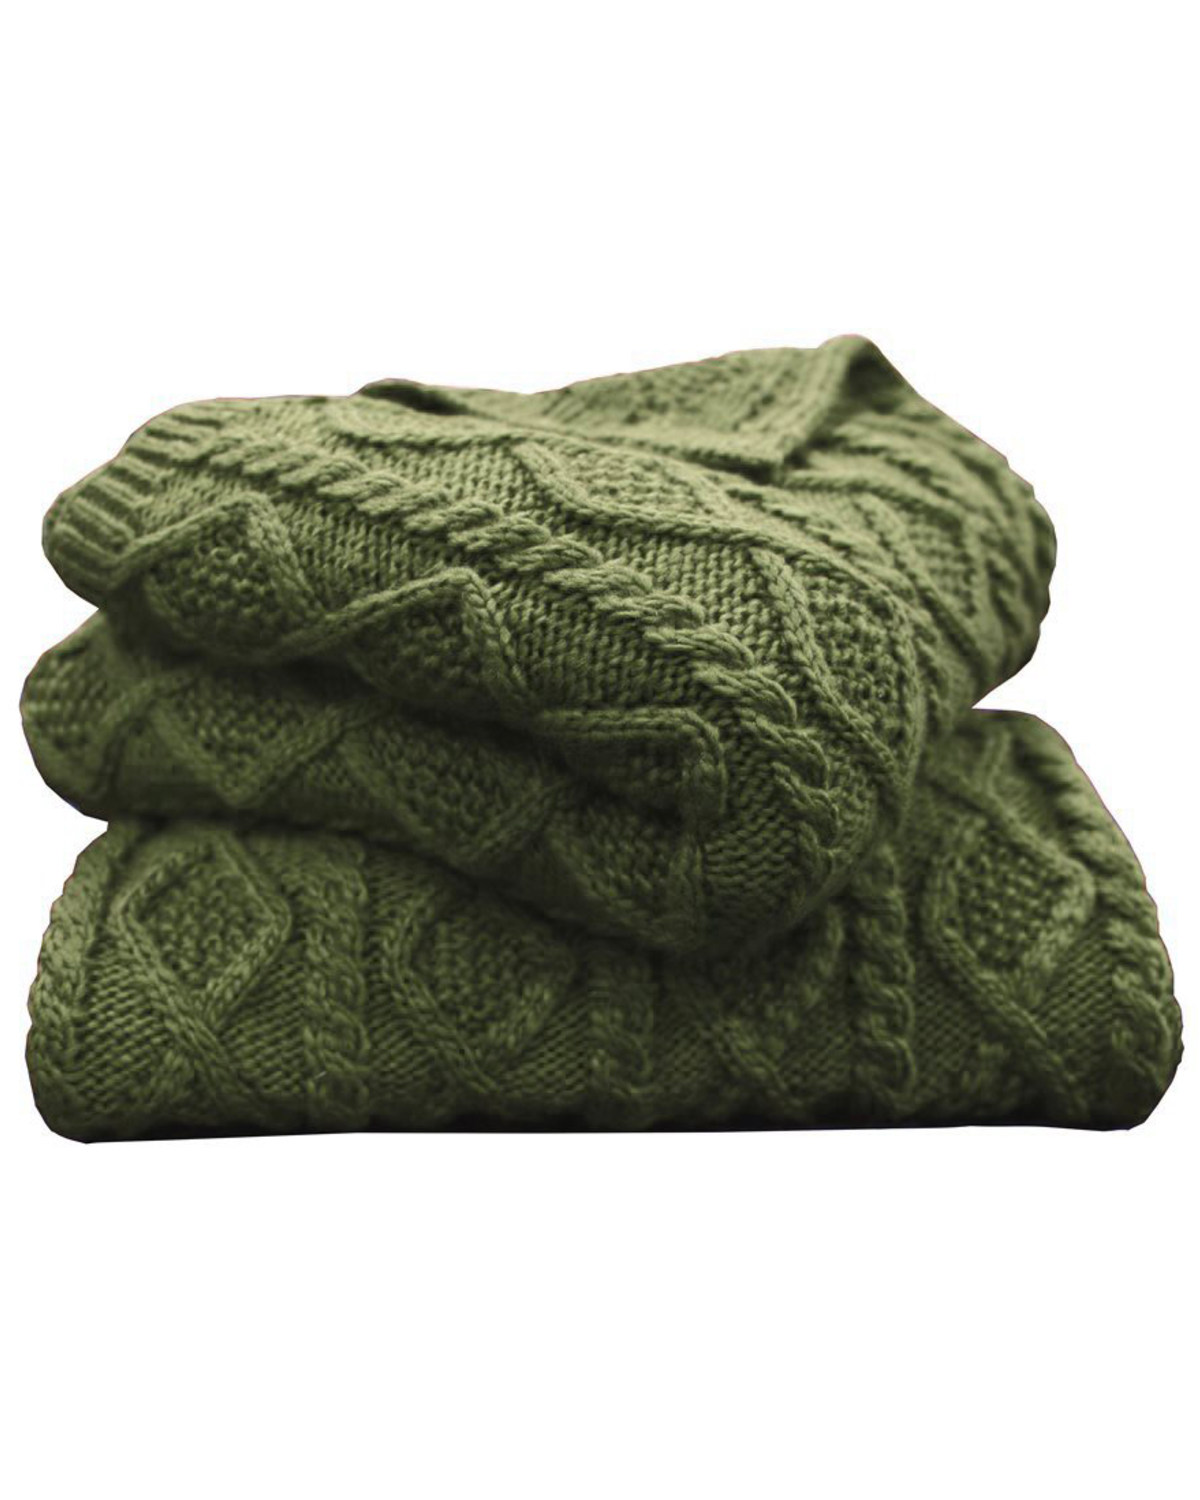 HiEnd Accents Green Cable Knit Throw Blanket Boot Barn